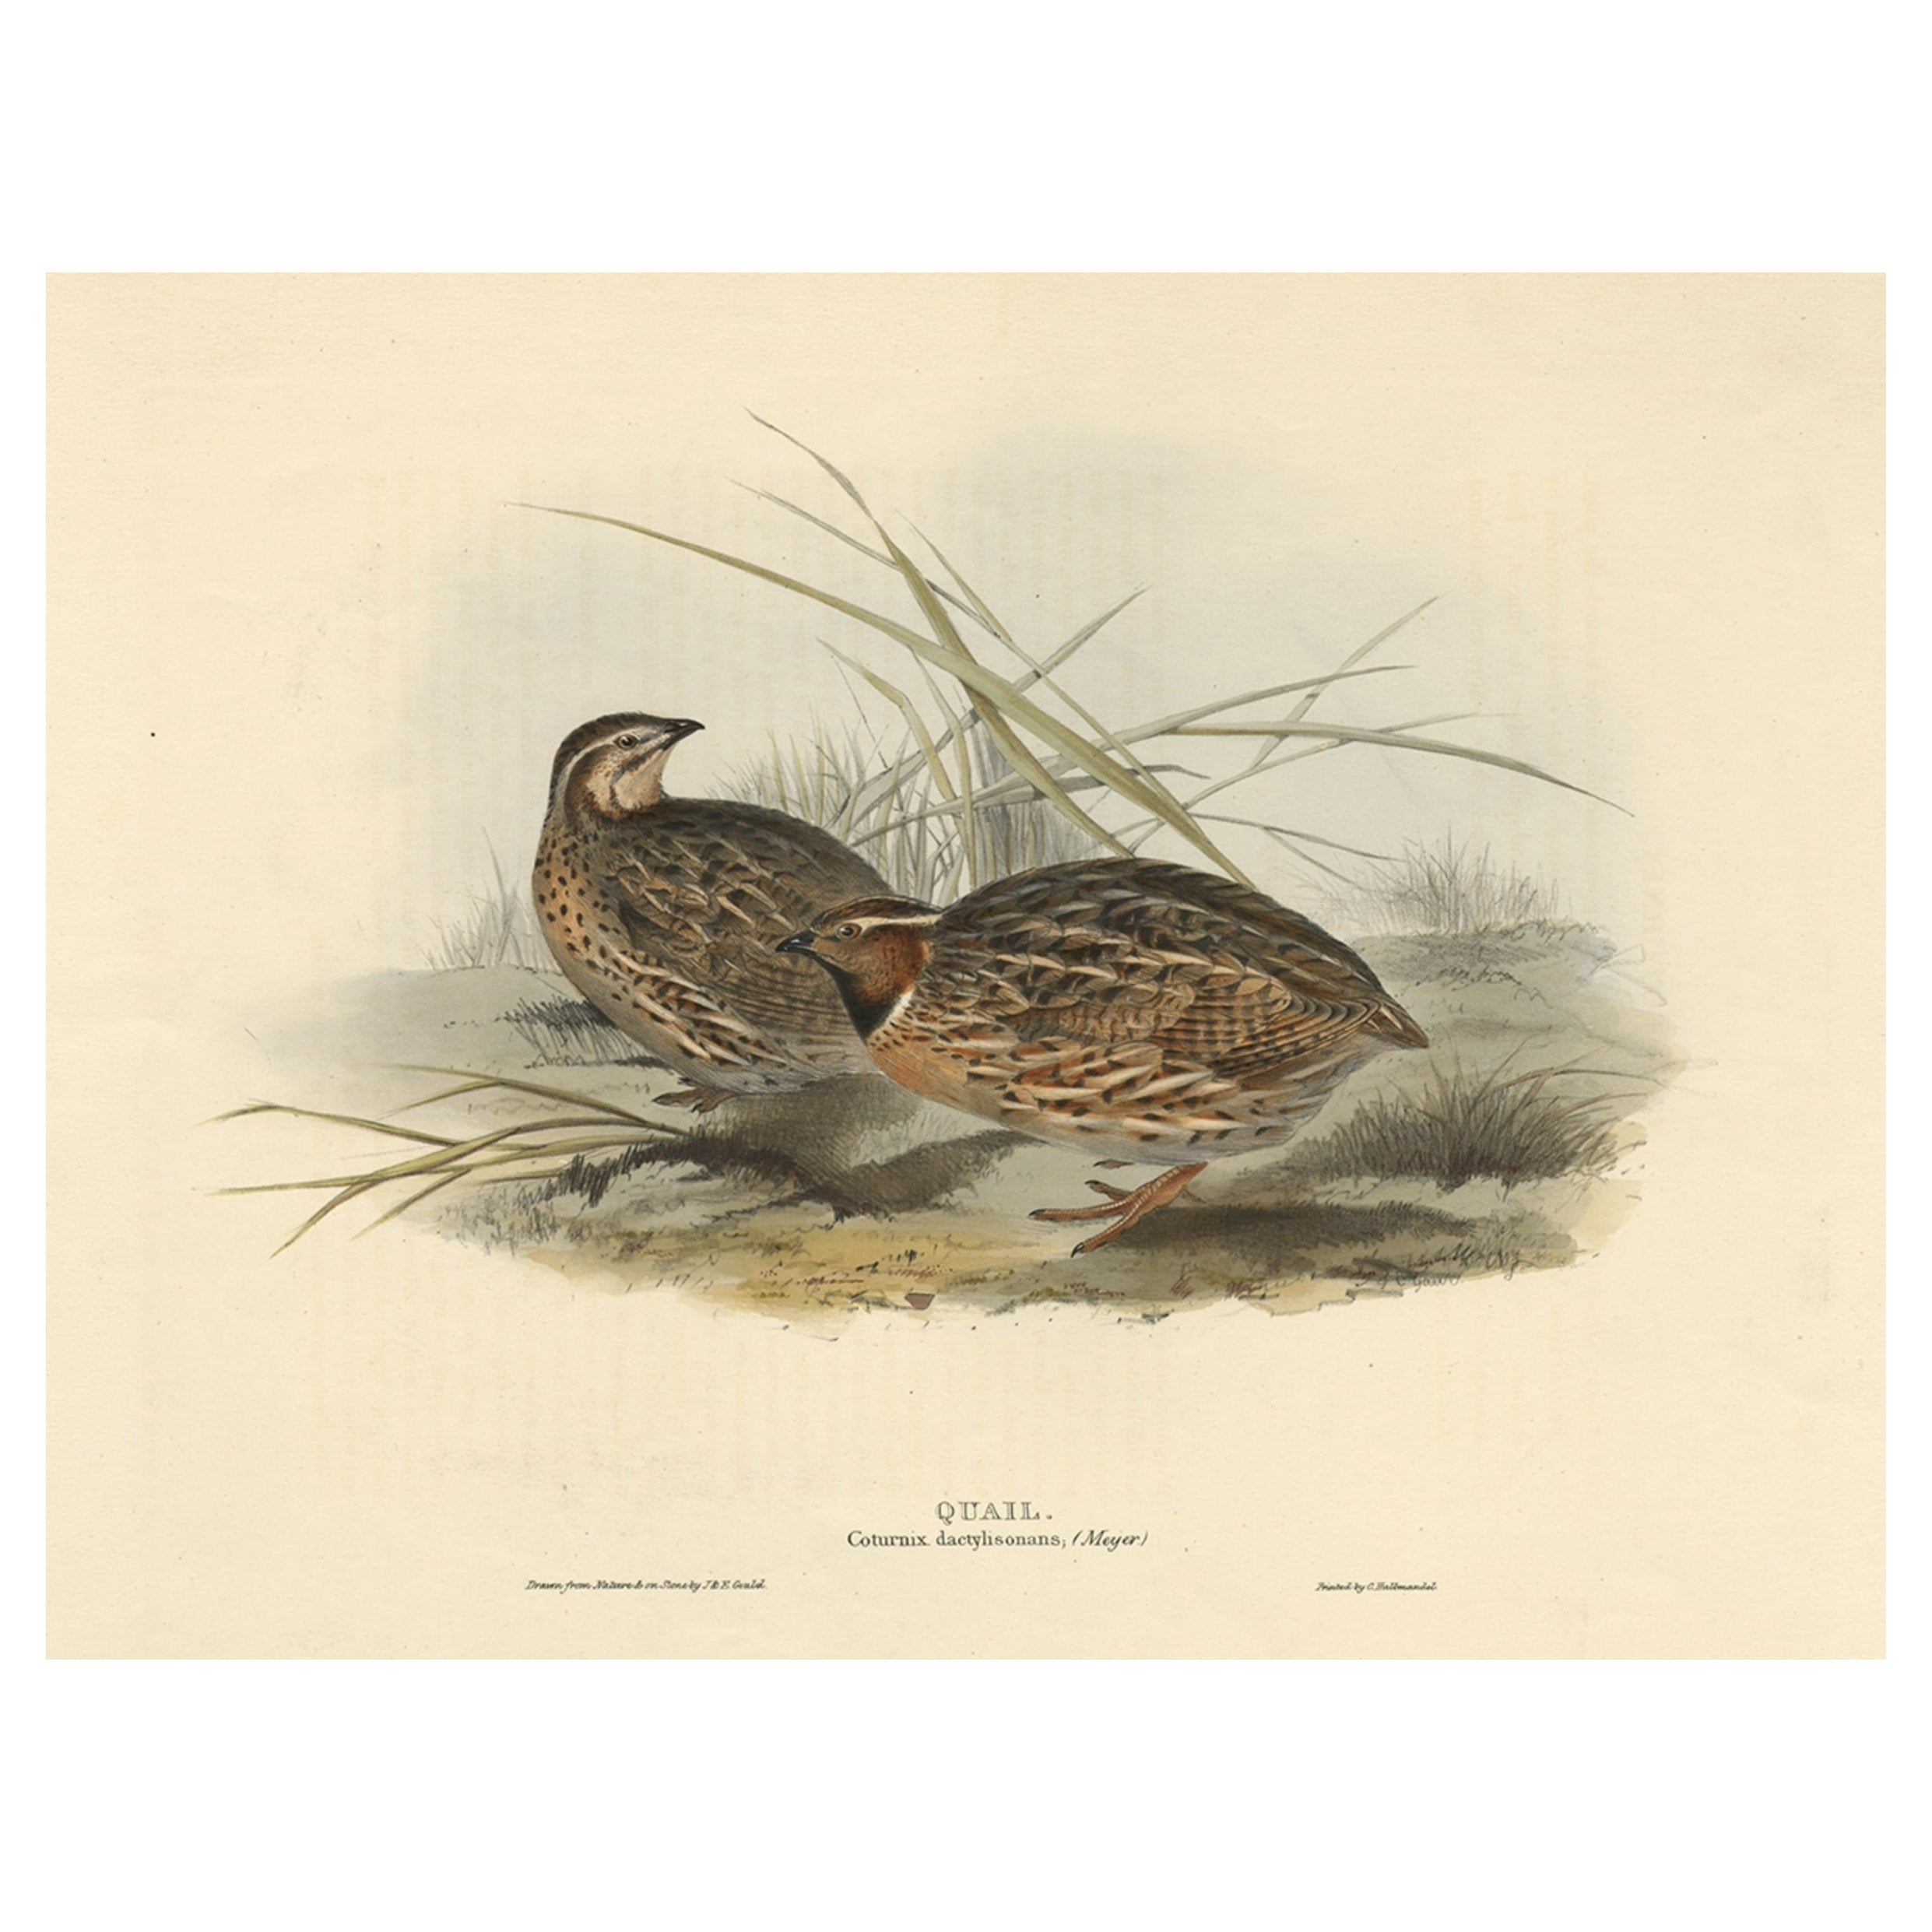 Beautiful Antique Hand-Colored Bird Print of the Common Quail by Gould, 1832